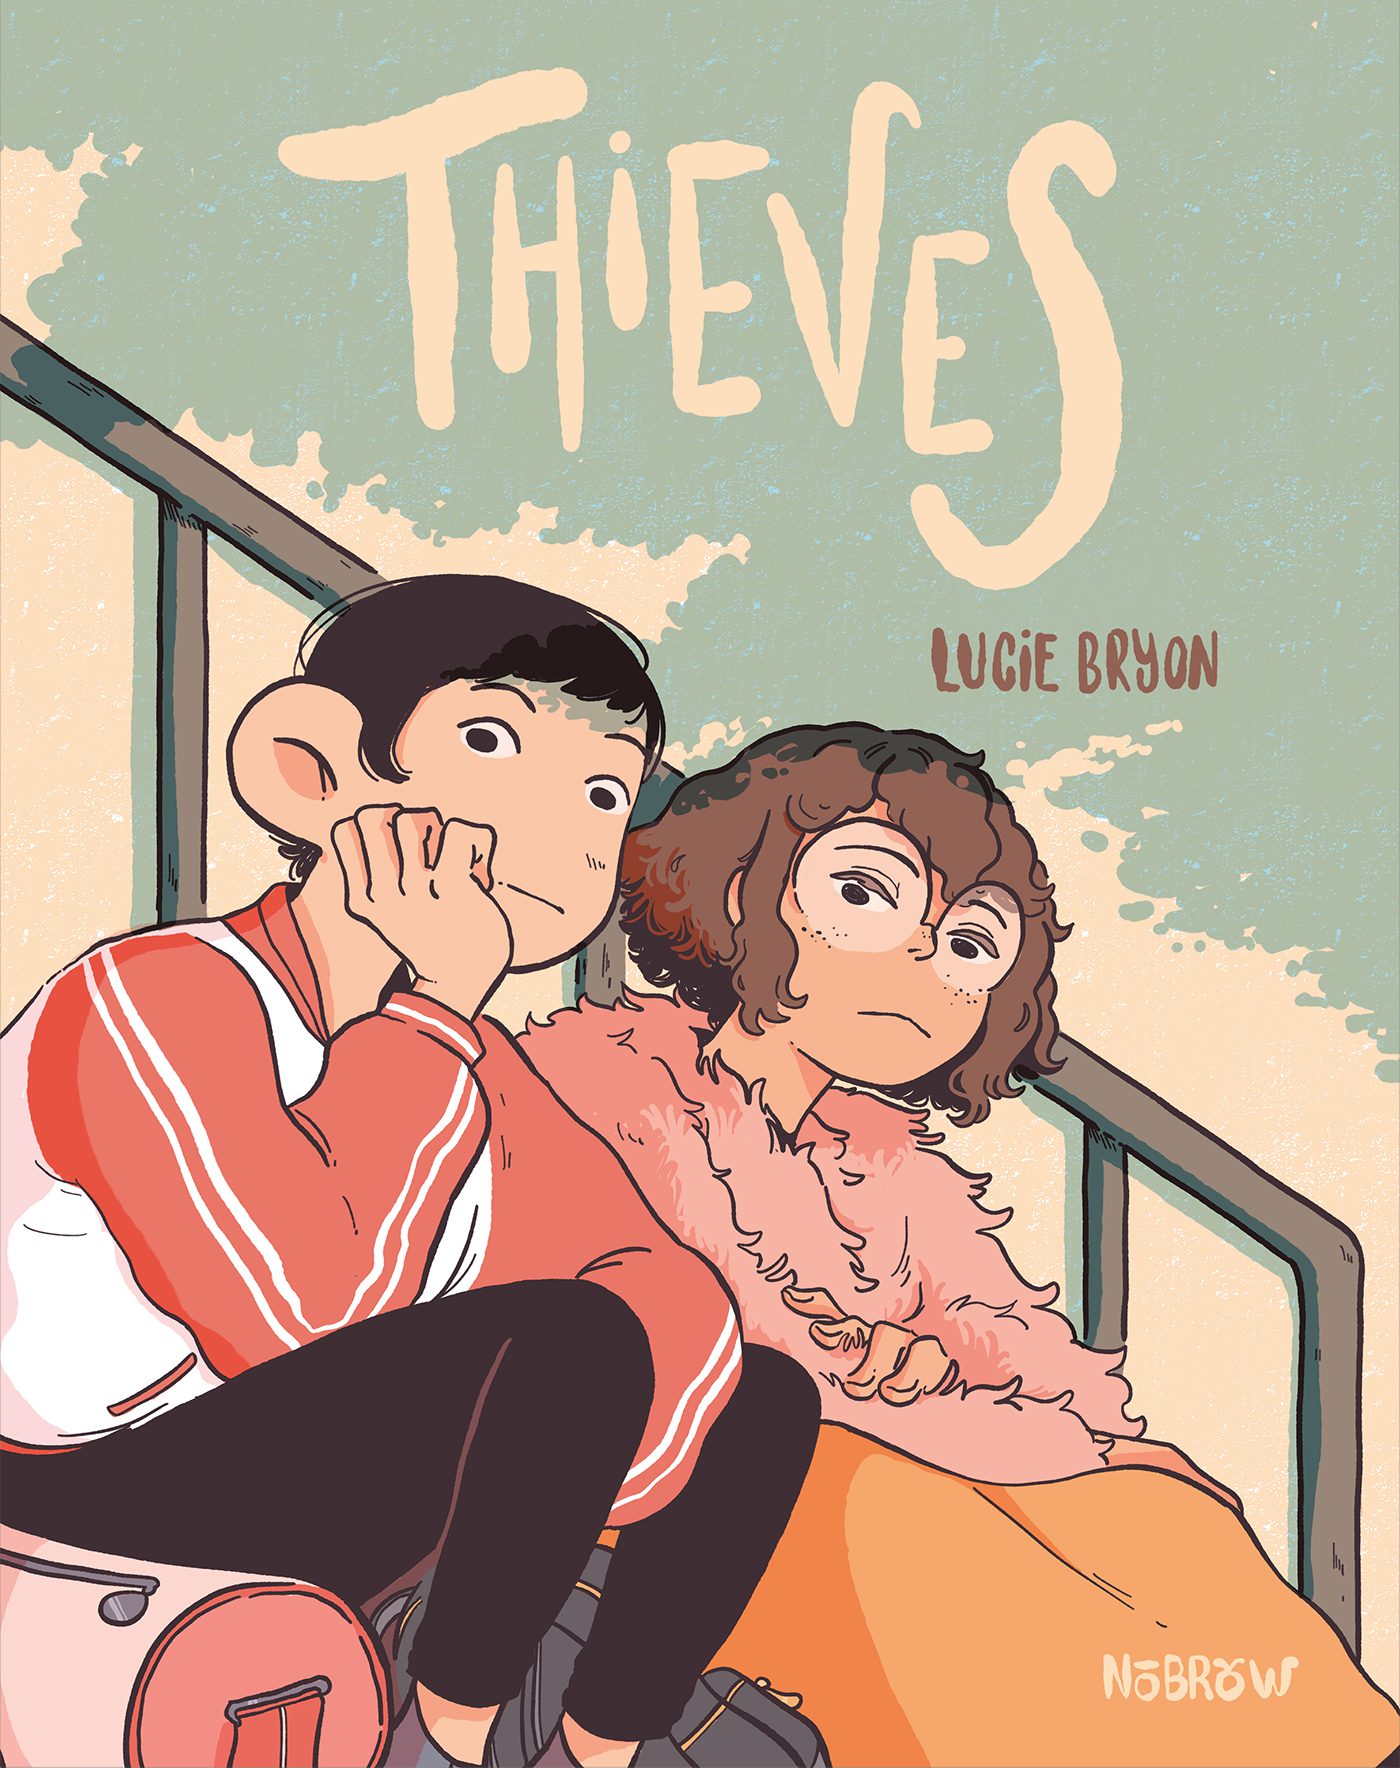 Thieves book cover